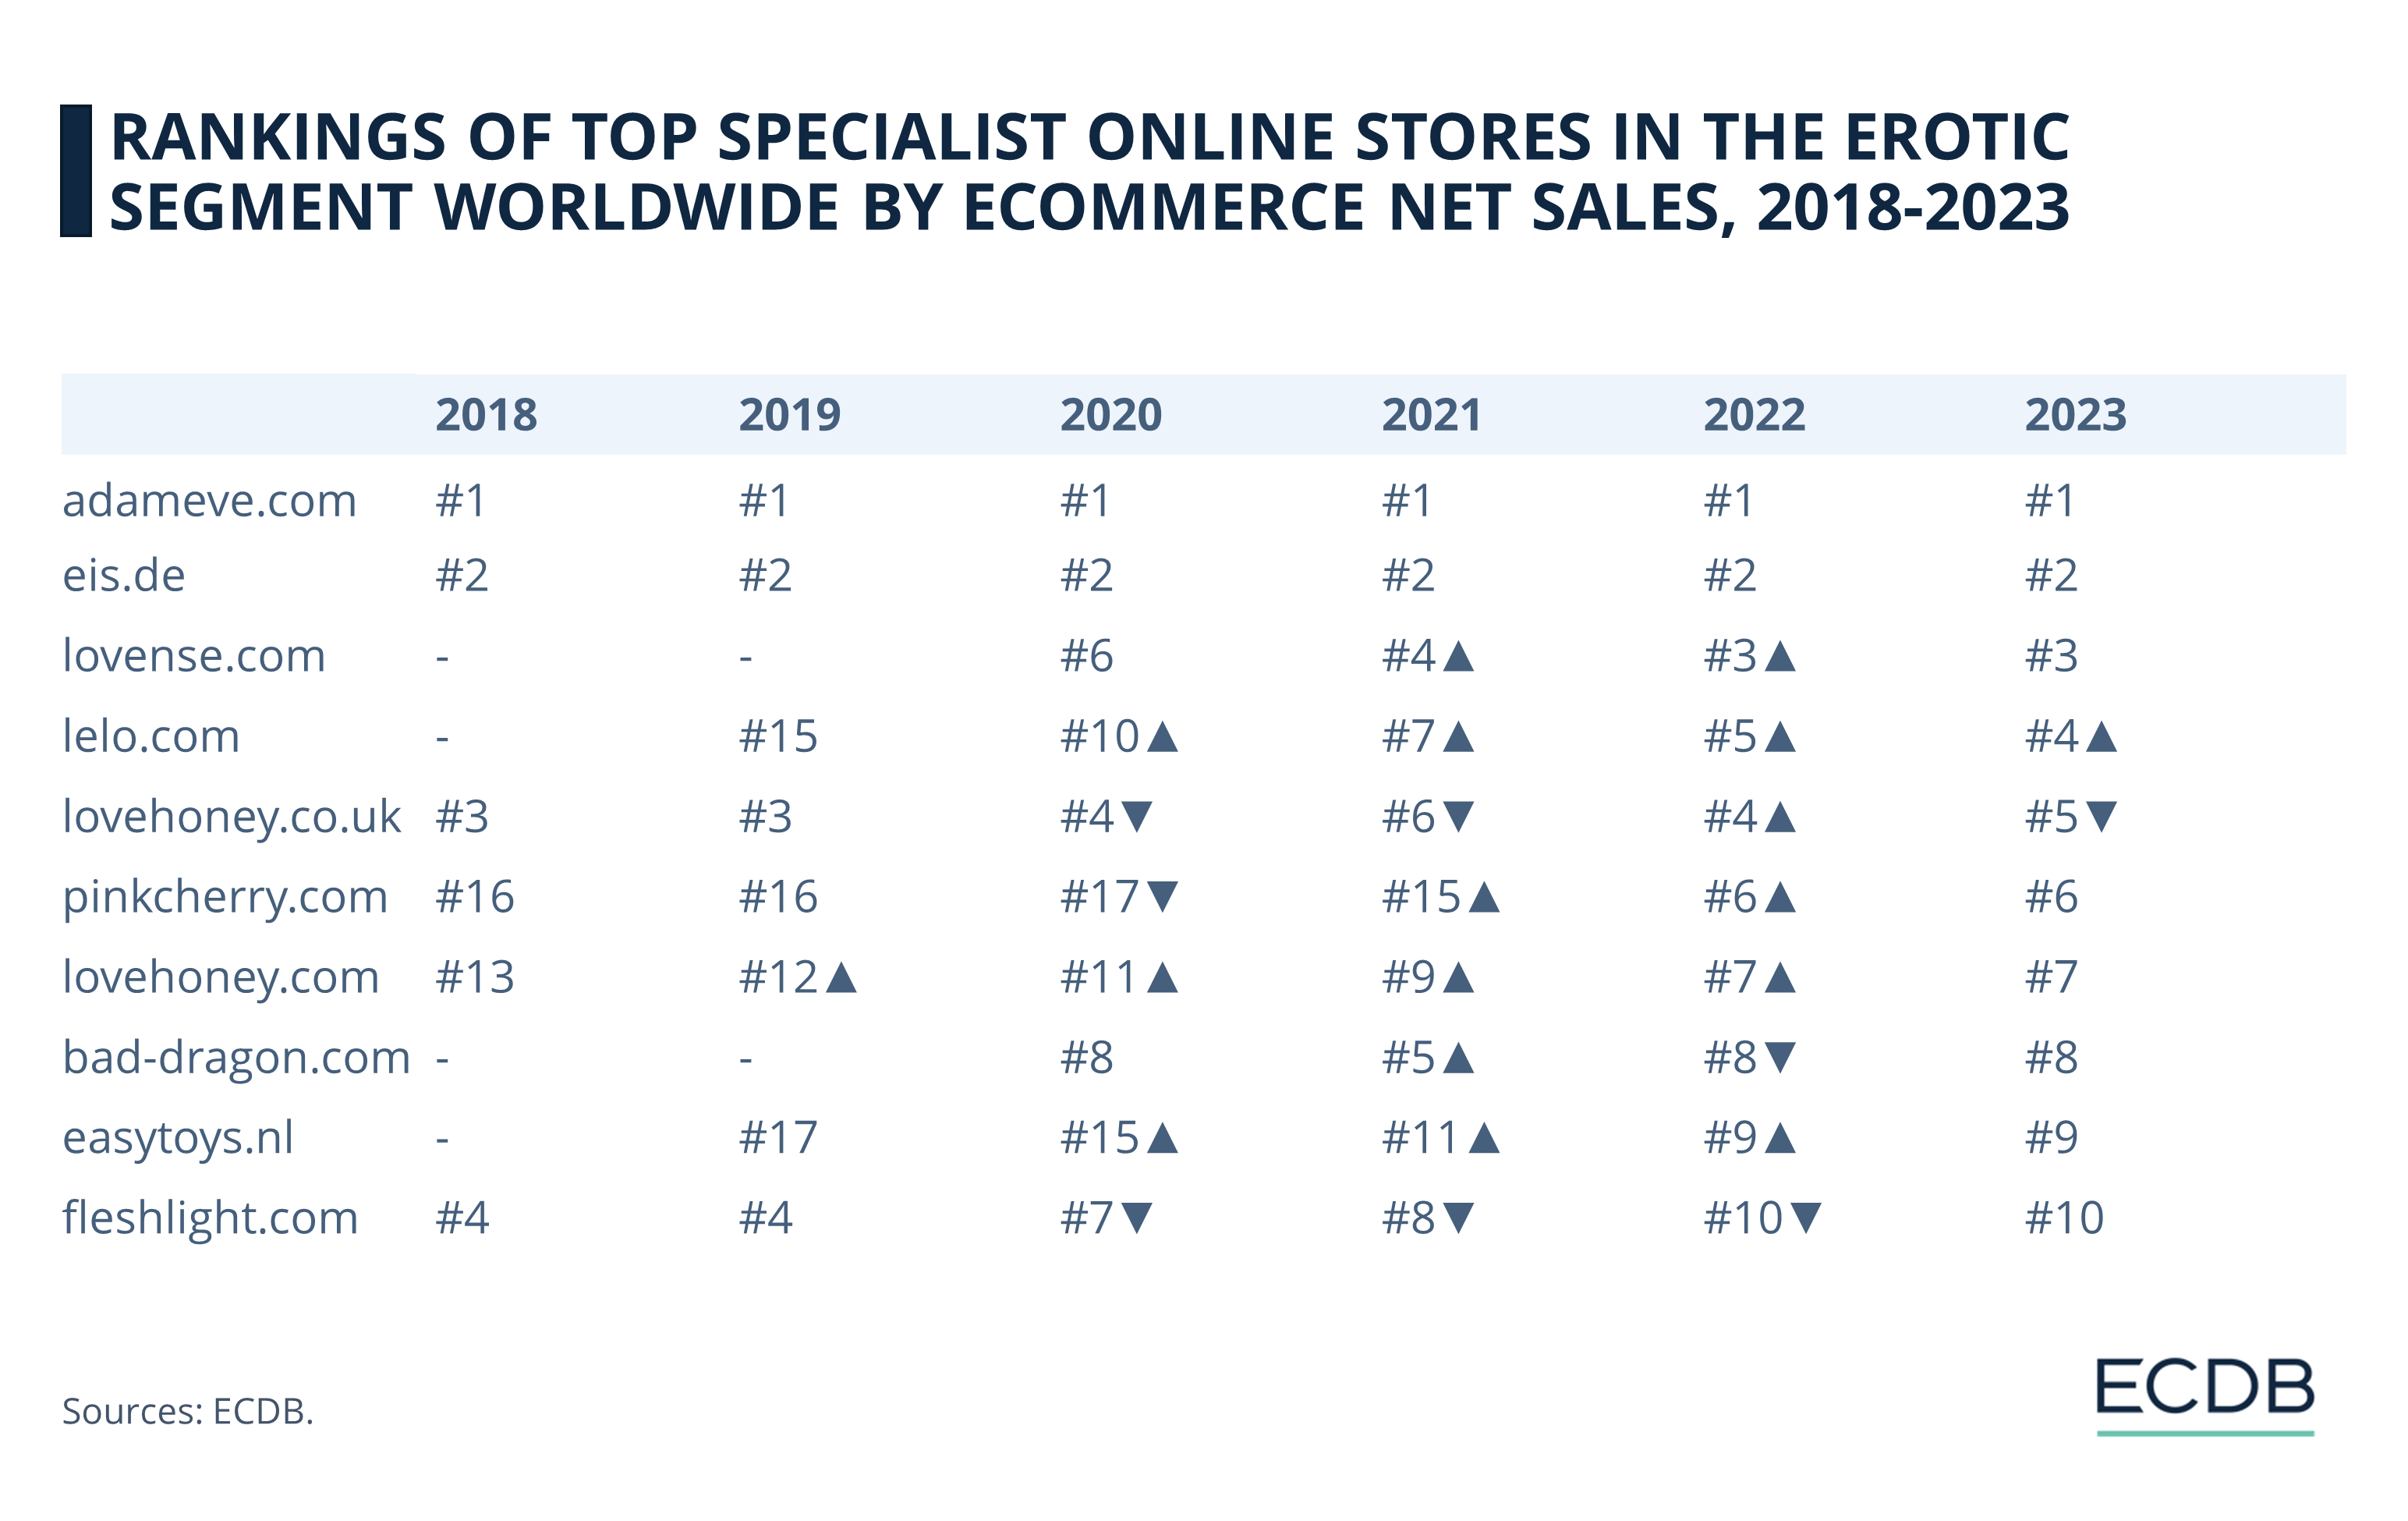 Rankings of Top Specialist Online Stores in the Erotic Segment Worldwide by eCommerce Net Sales, 2018-2023